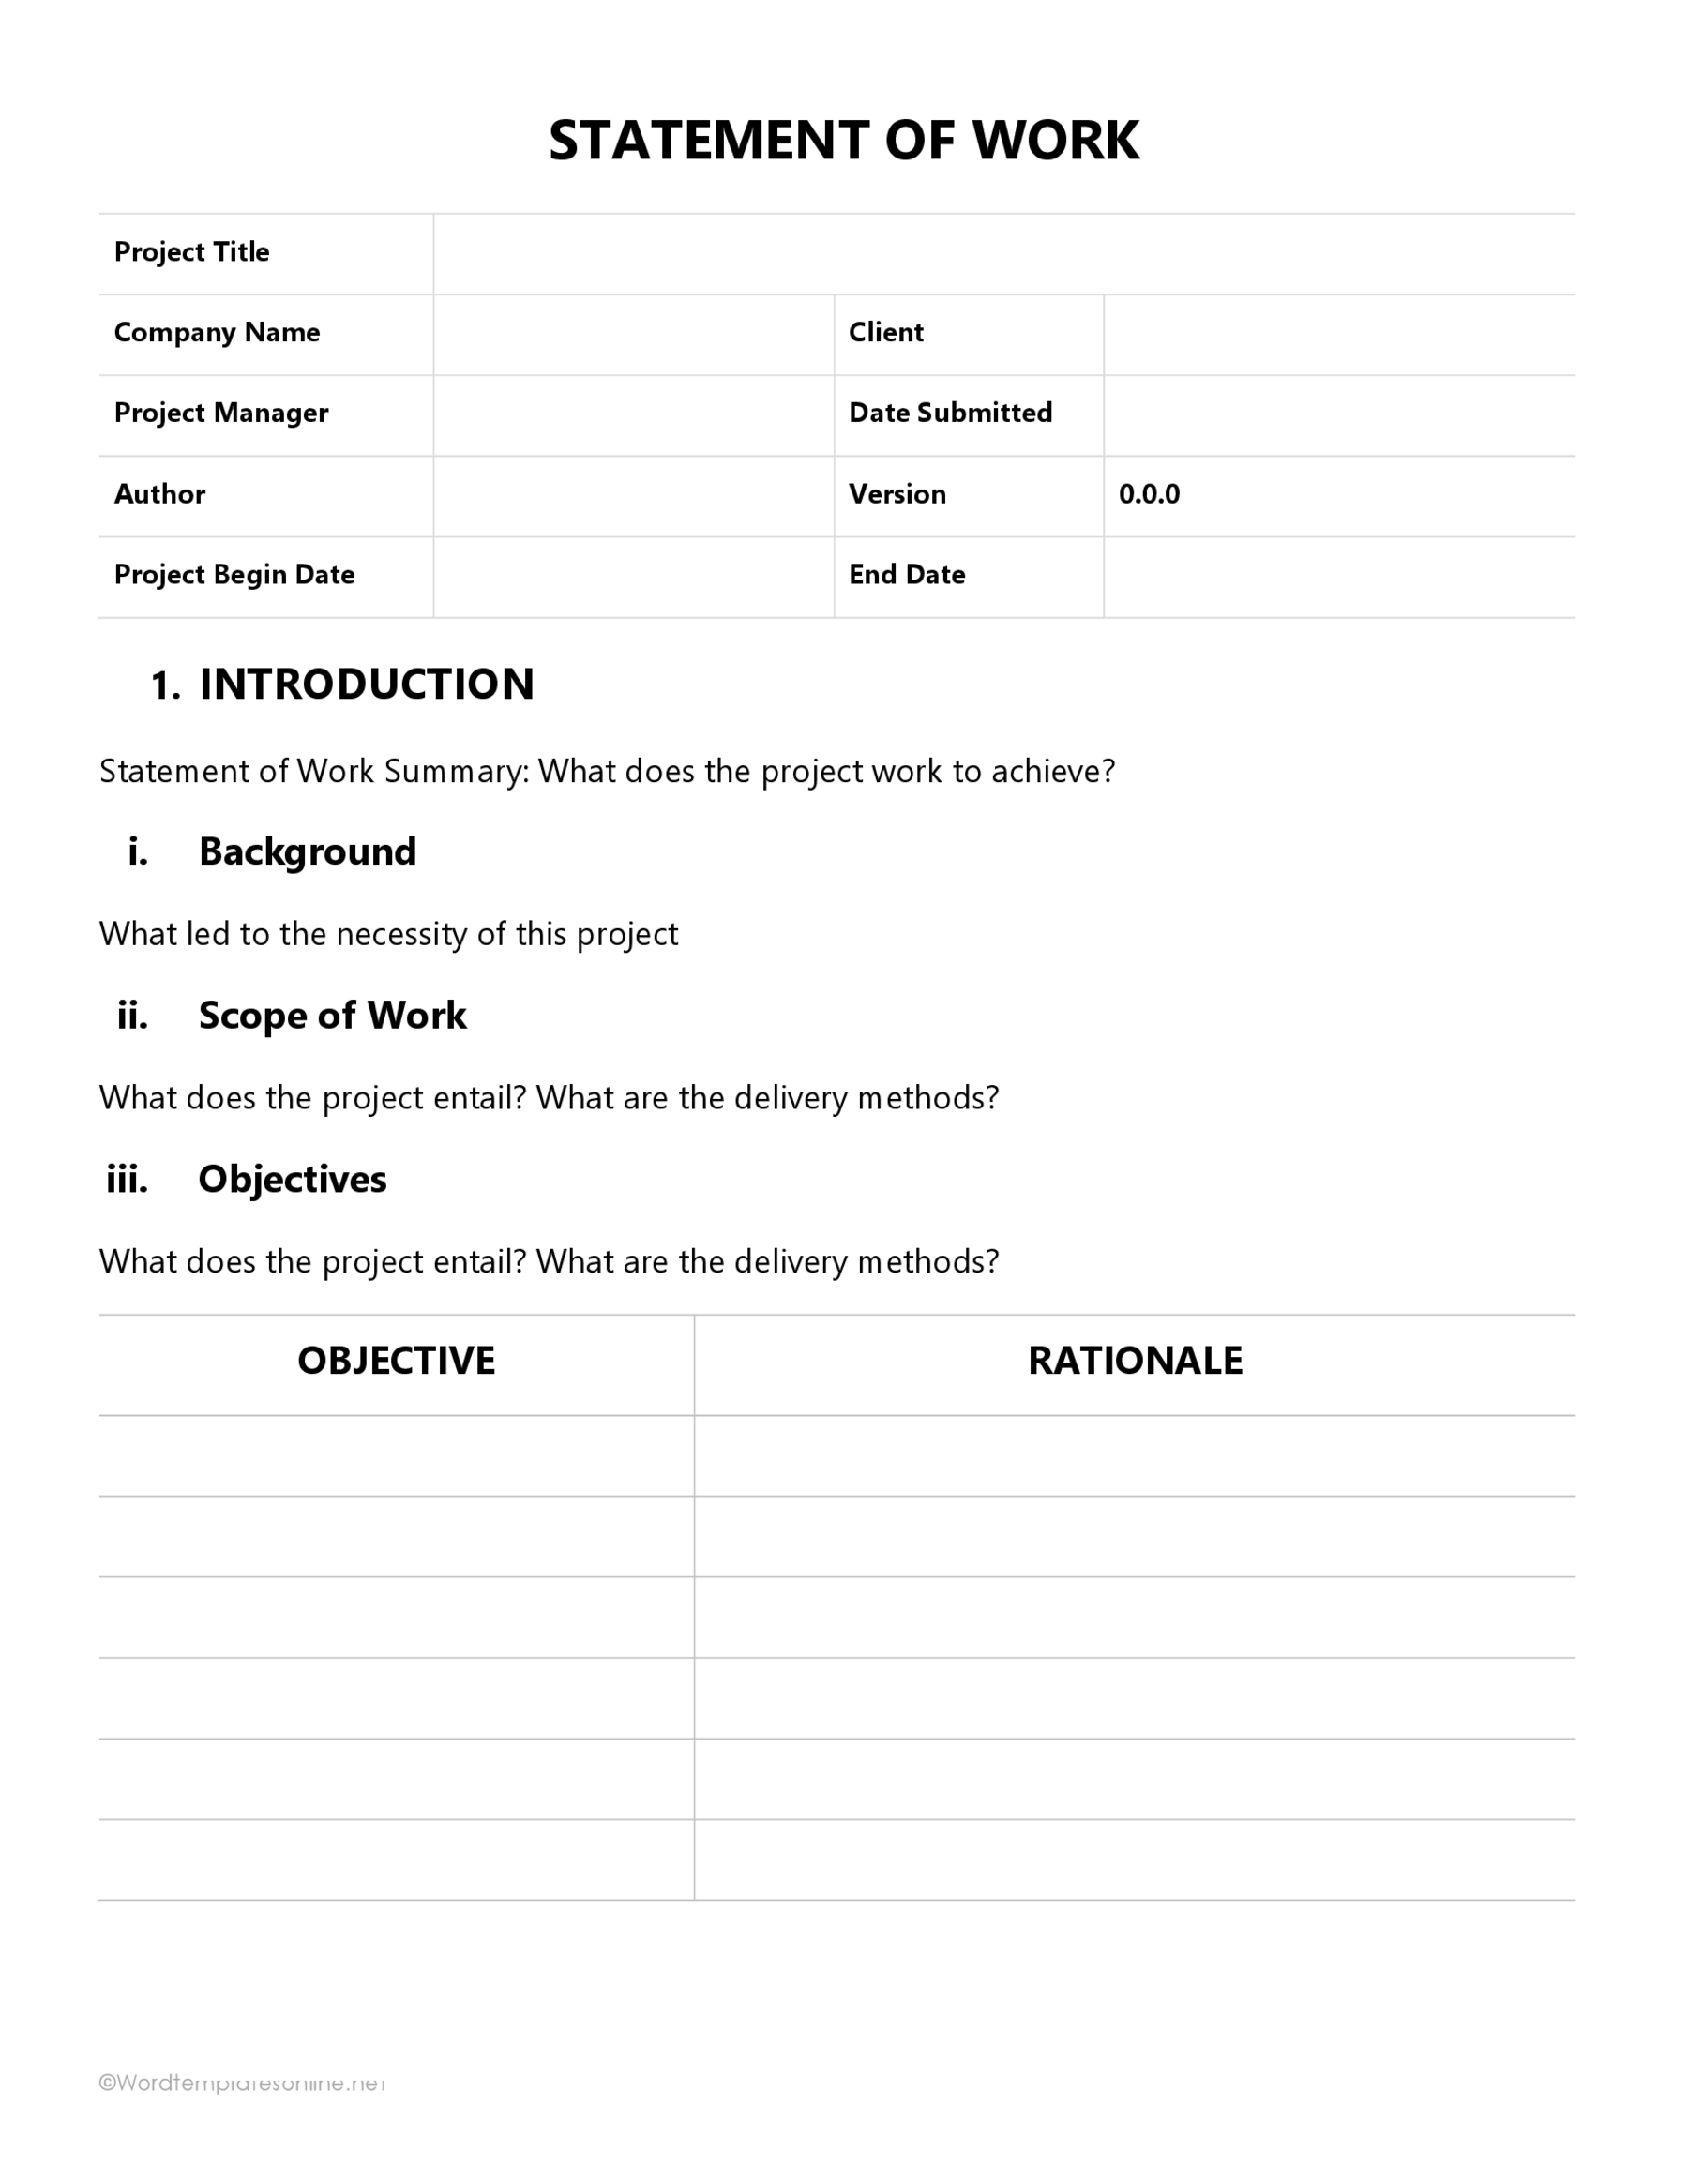 Free Customizable Company Statement of Work Template 02 for Word Document